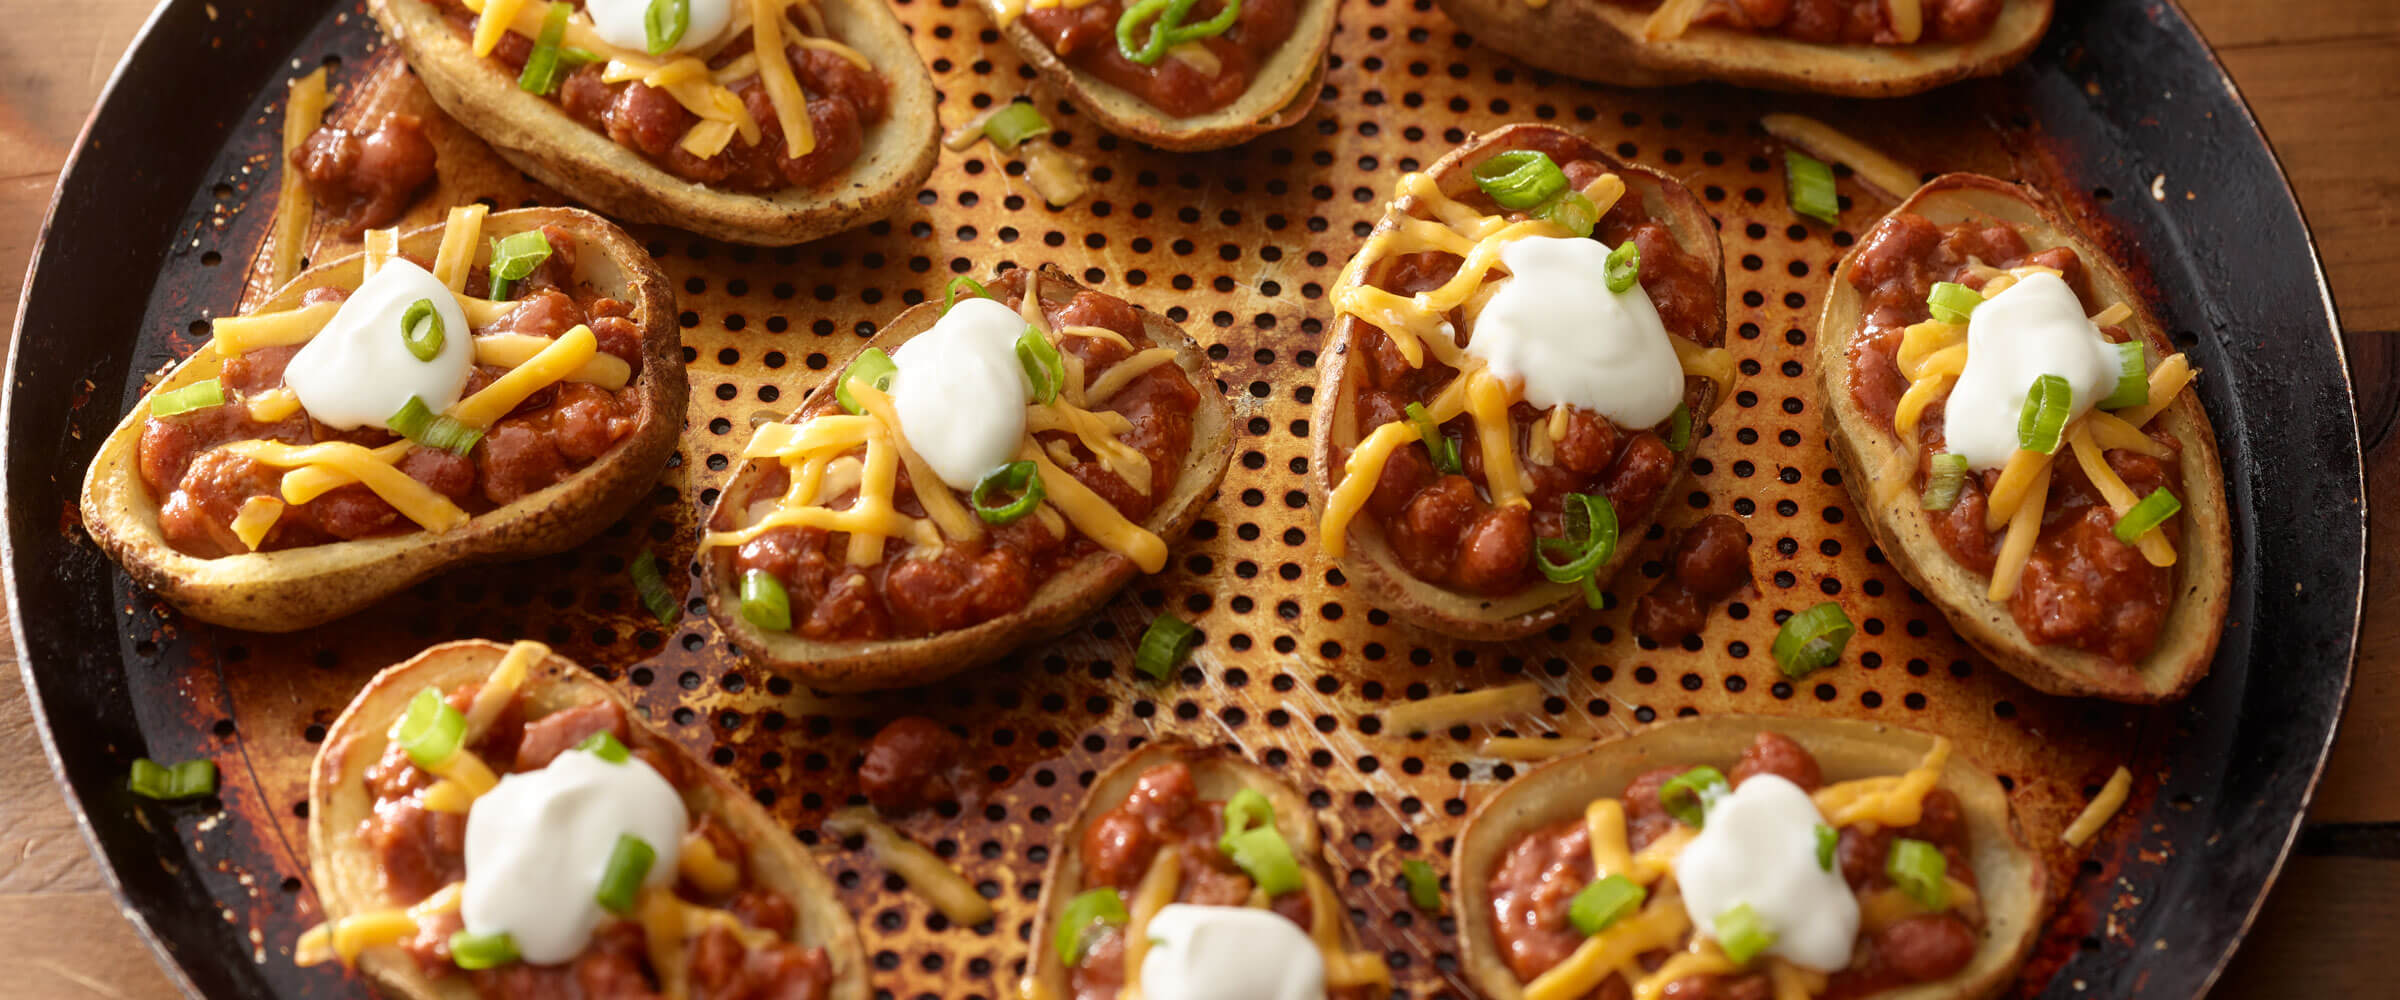 Super Loaded Chili Potato Skins topped with sour cream and cheese on metal pan